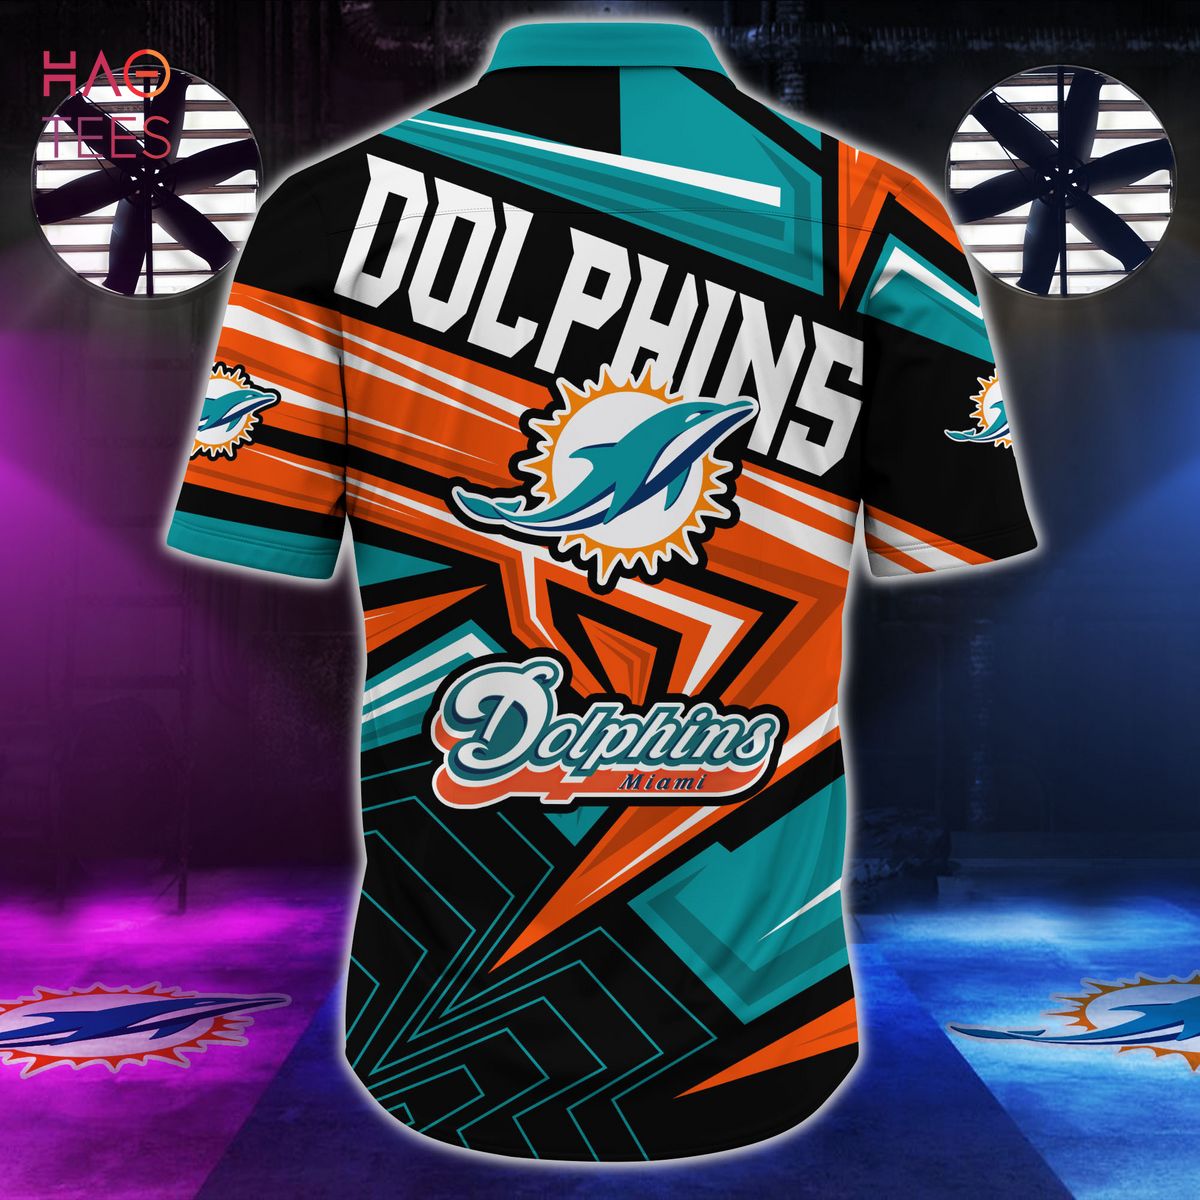 new miami dolphins jersey